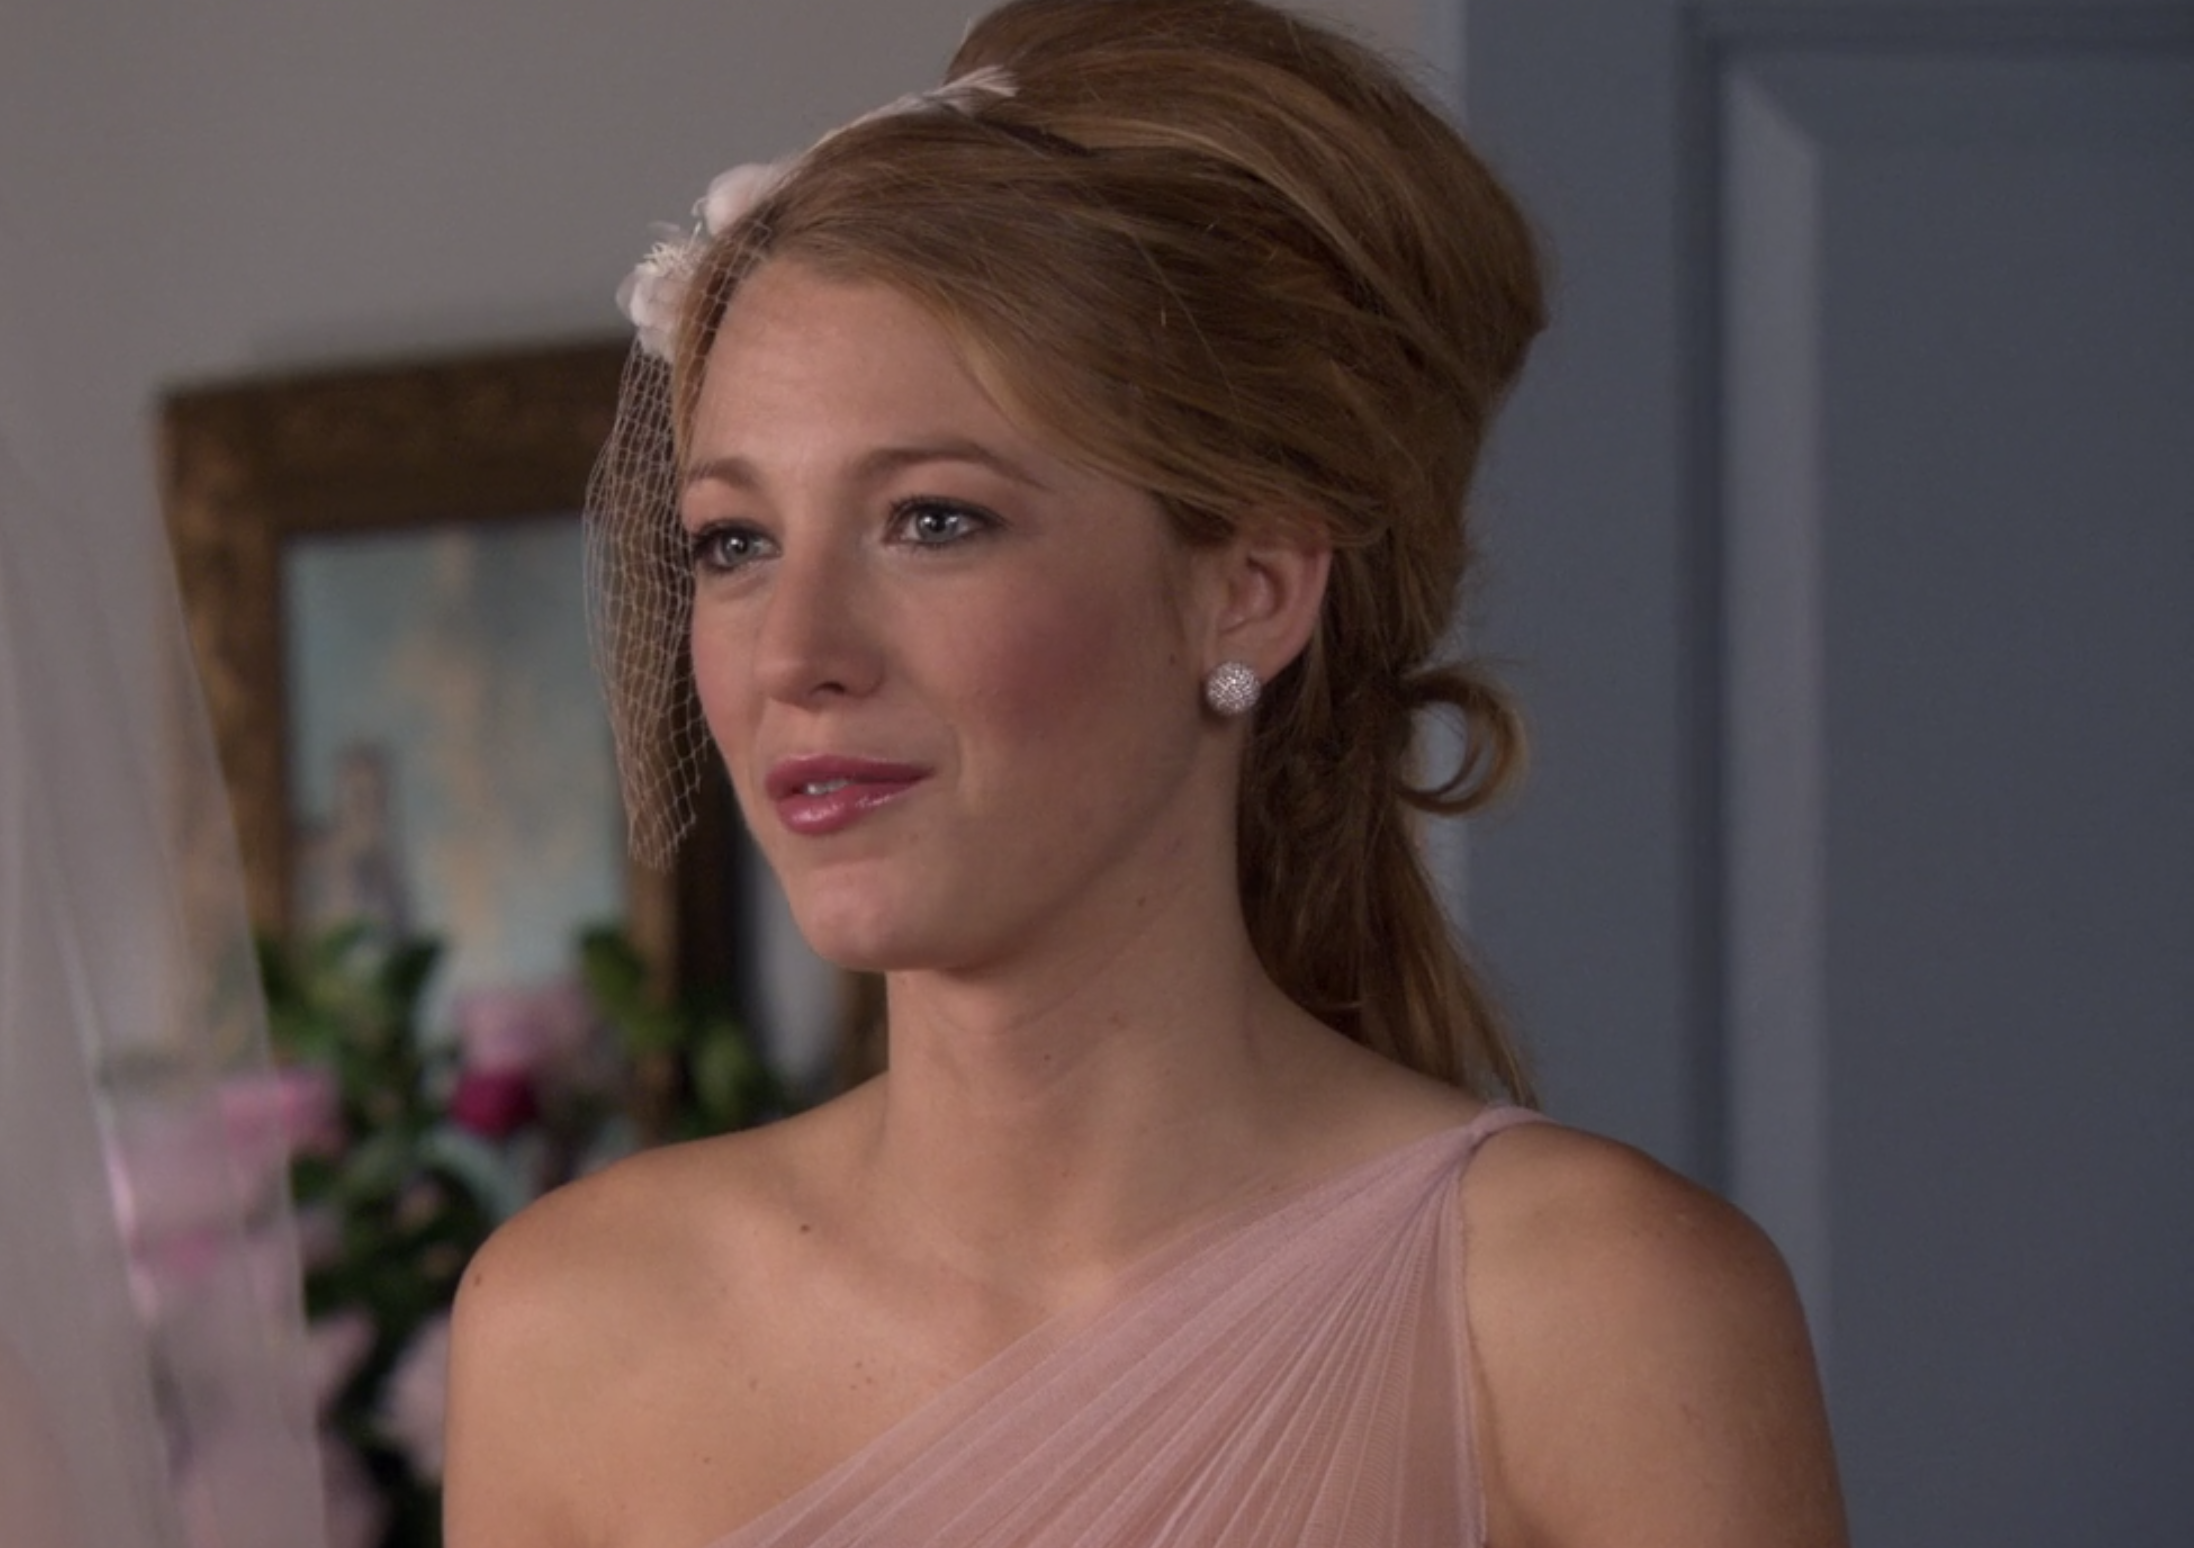 Blake Lively with an enormous Bumpit in her hair